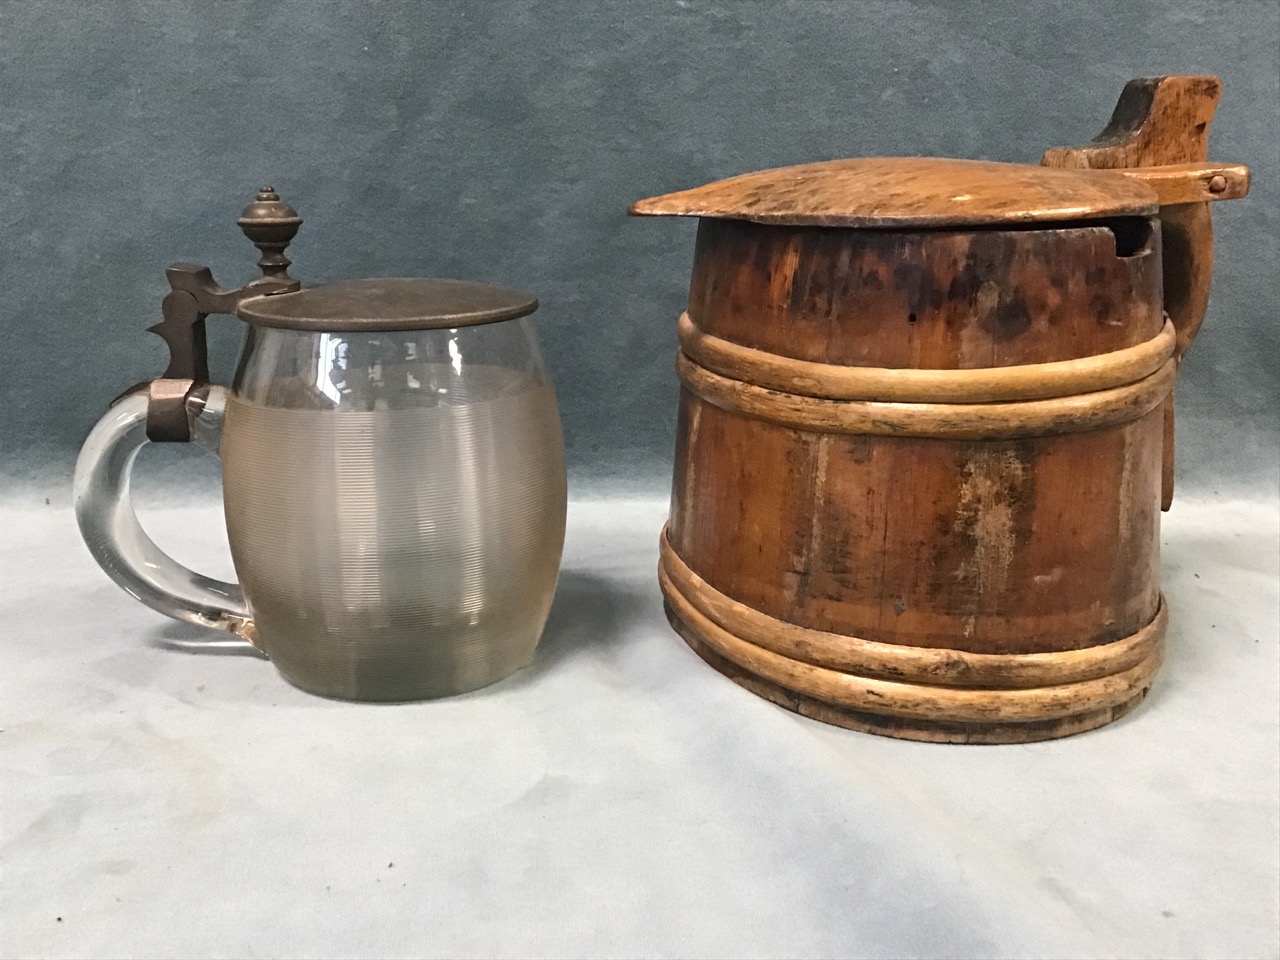 A 19th century Scandinavian coopered pine covered tankard; and an antique German cut glass half-